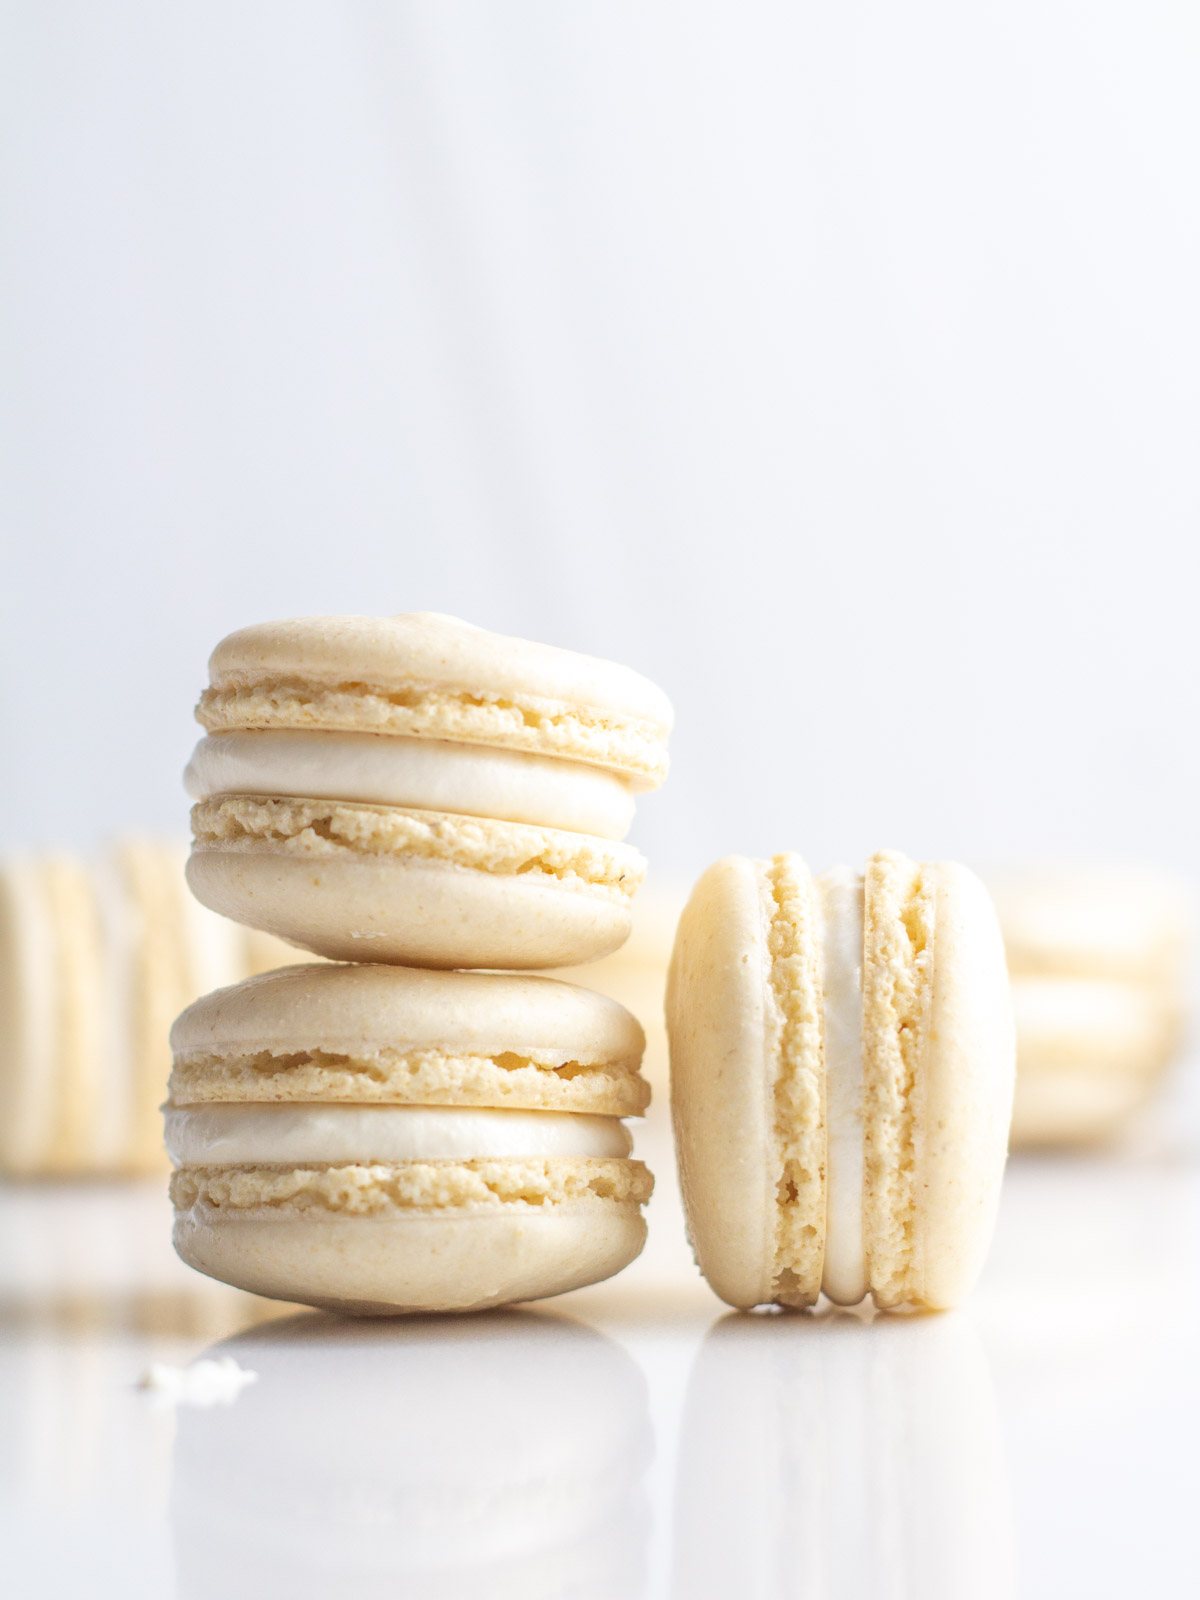 Close up of two oat flour macarons stacked with another on its side next to the stack.